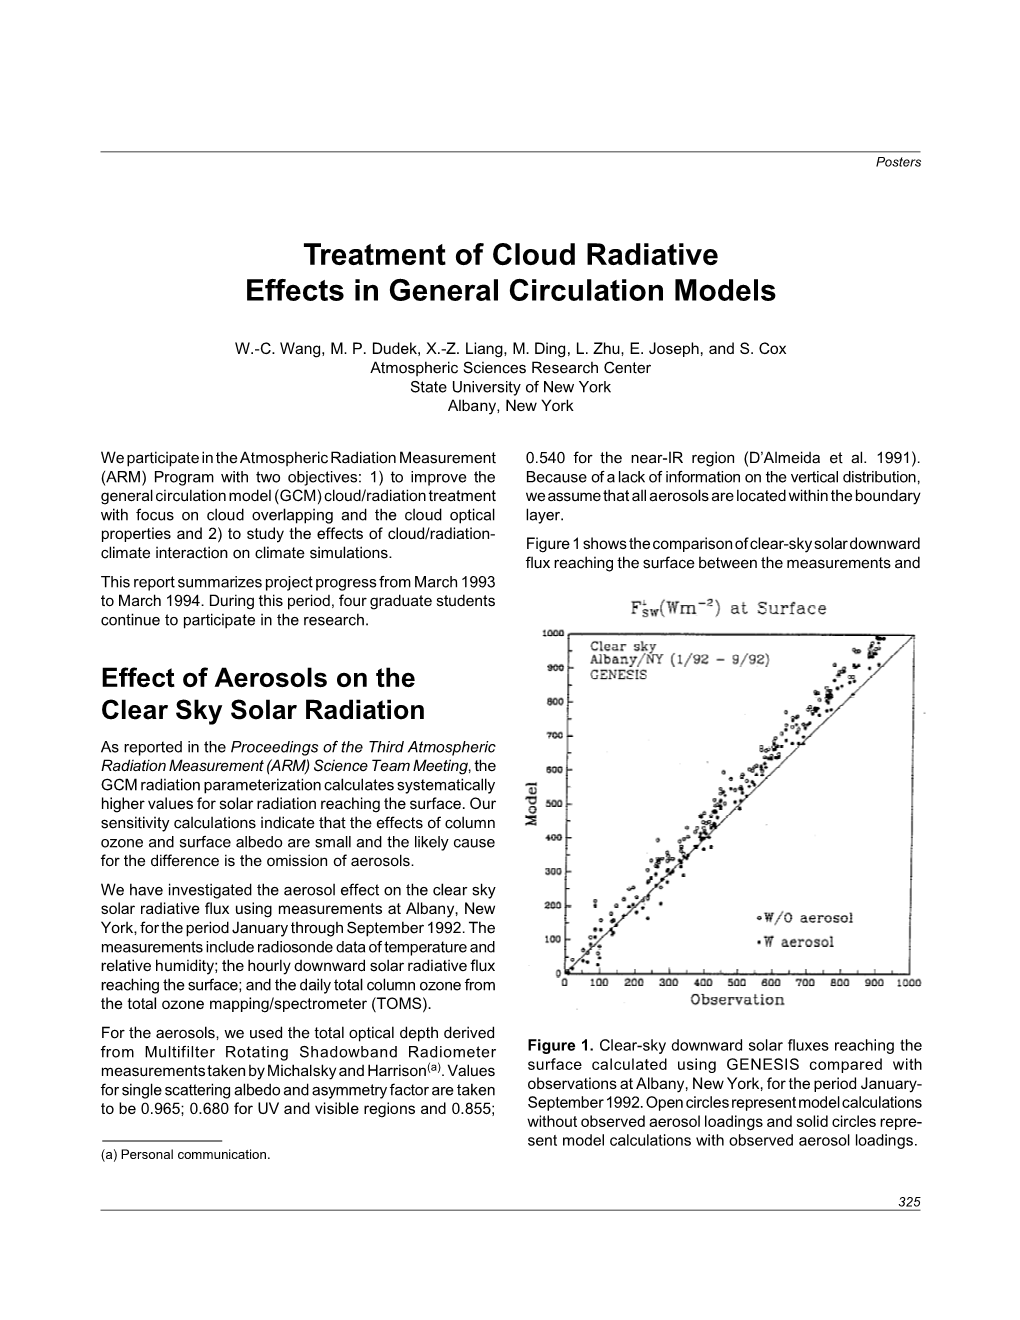 Treatment of Cloud Radiative Effects in General Circulation Models